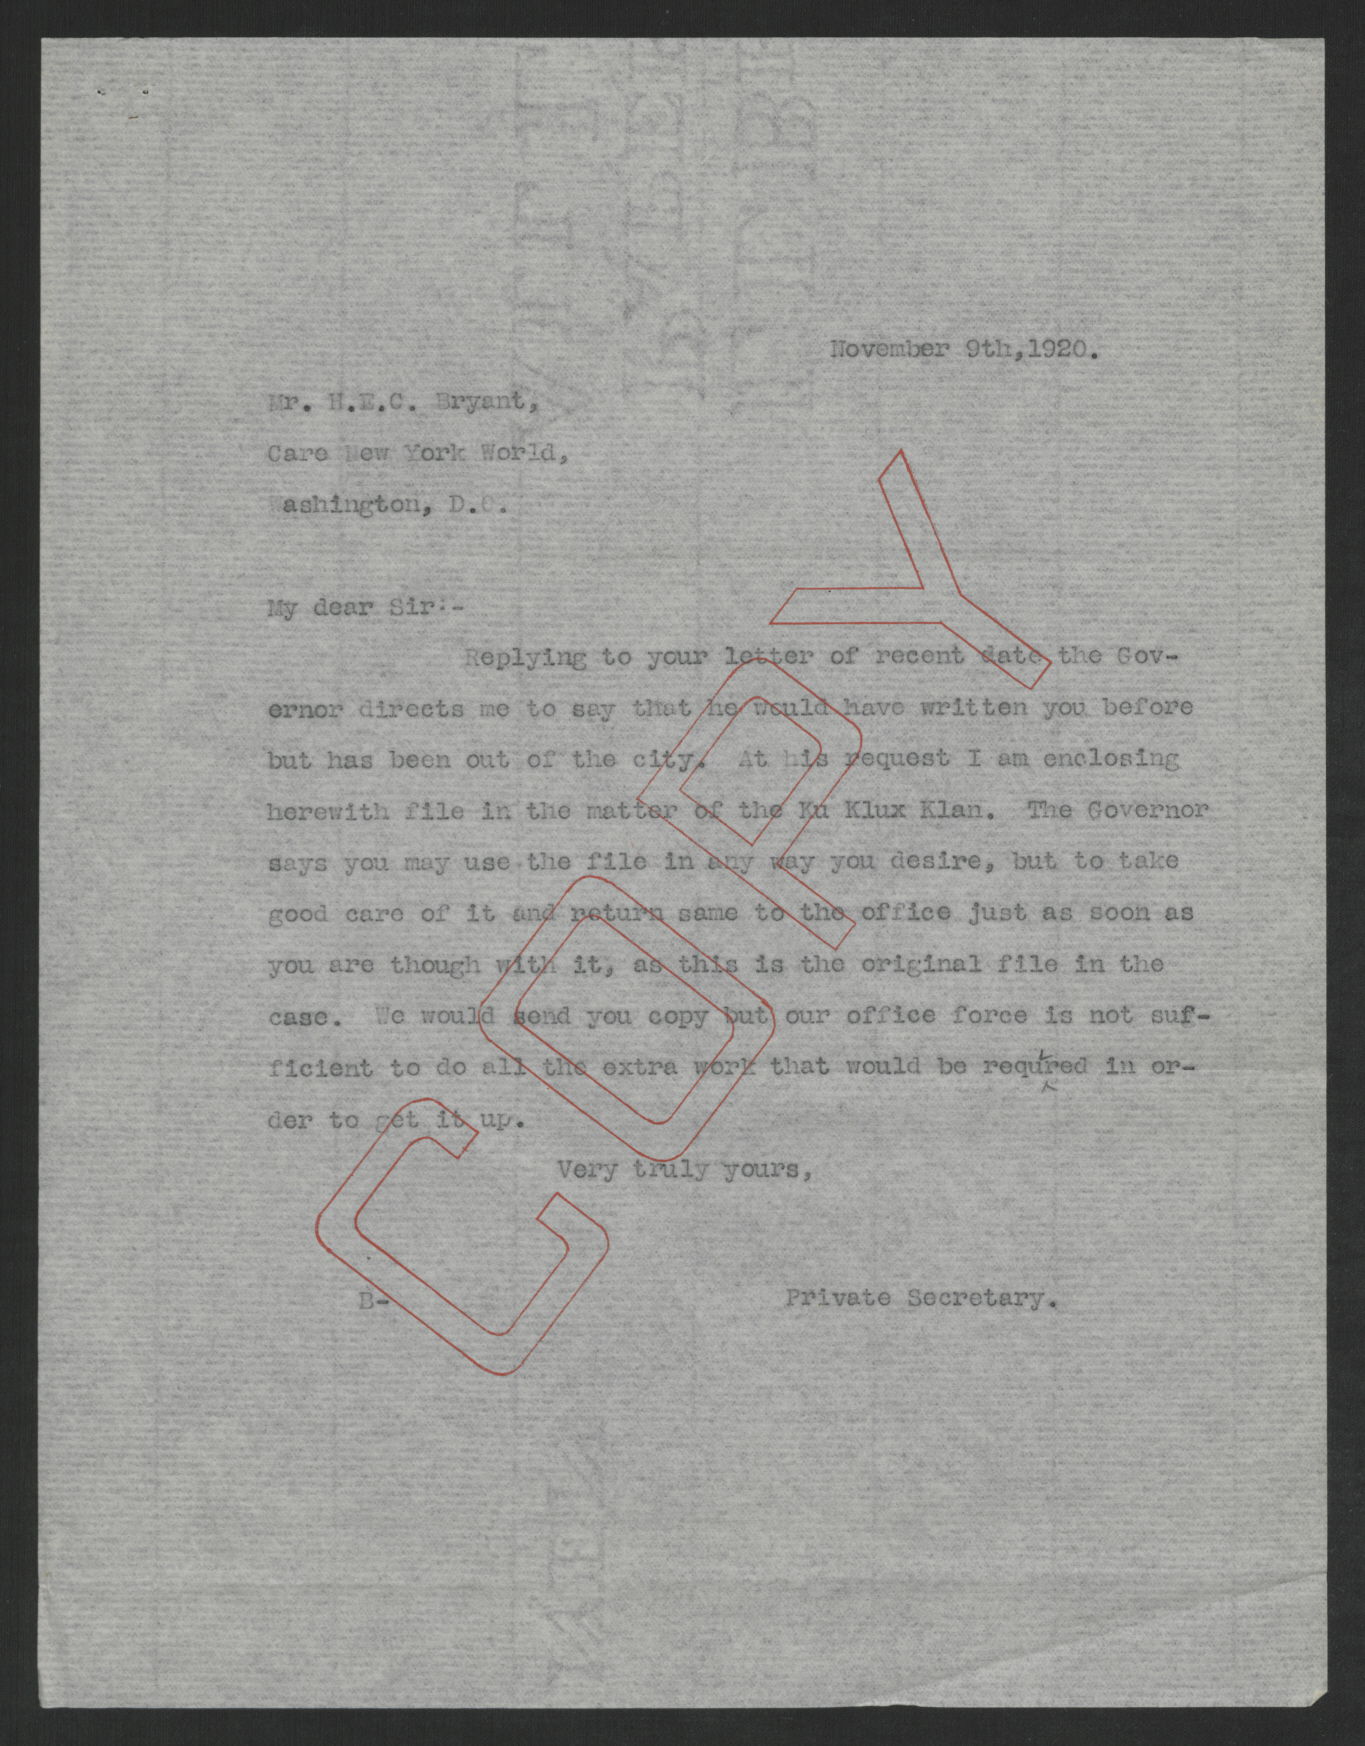 Letter from William Y. Bickett to Henry E. C. Bryant, November 9, 1920